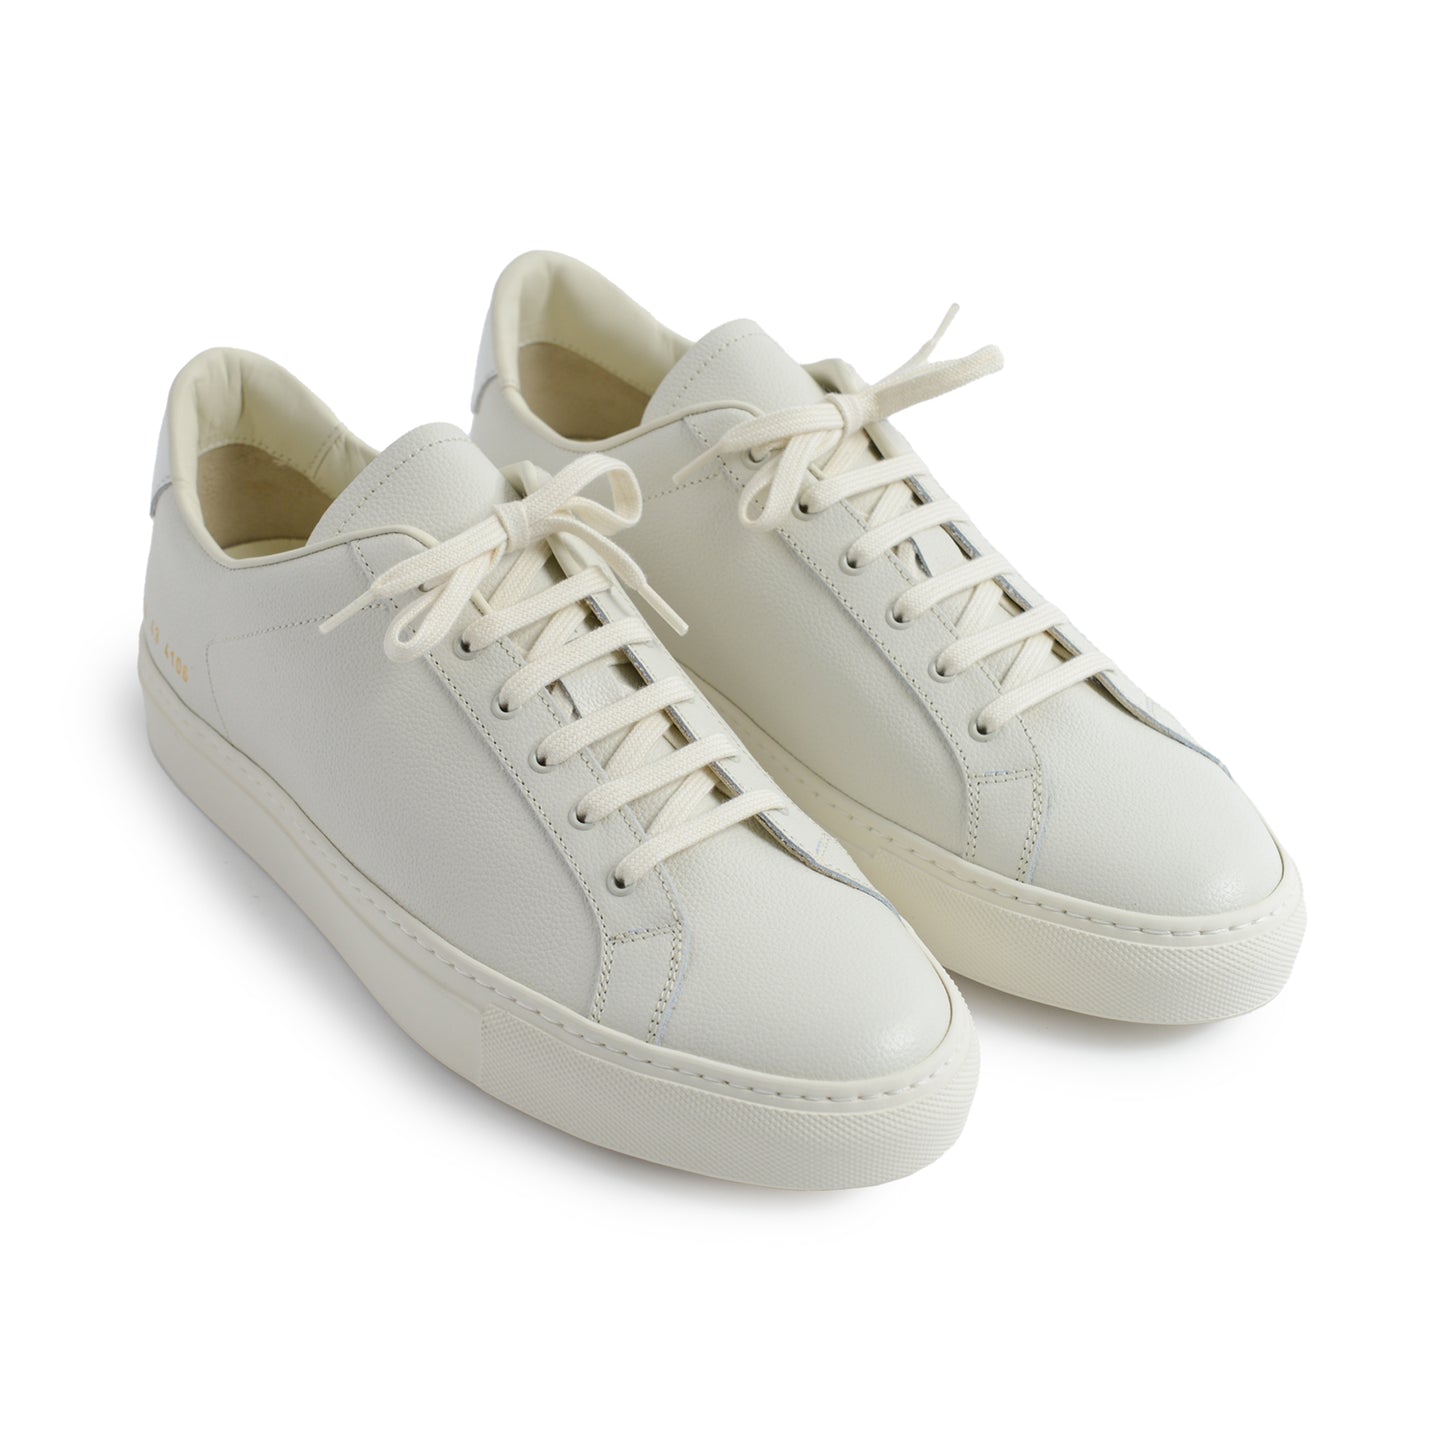 Common Projects Retro Bumpy Sneakers